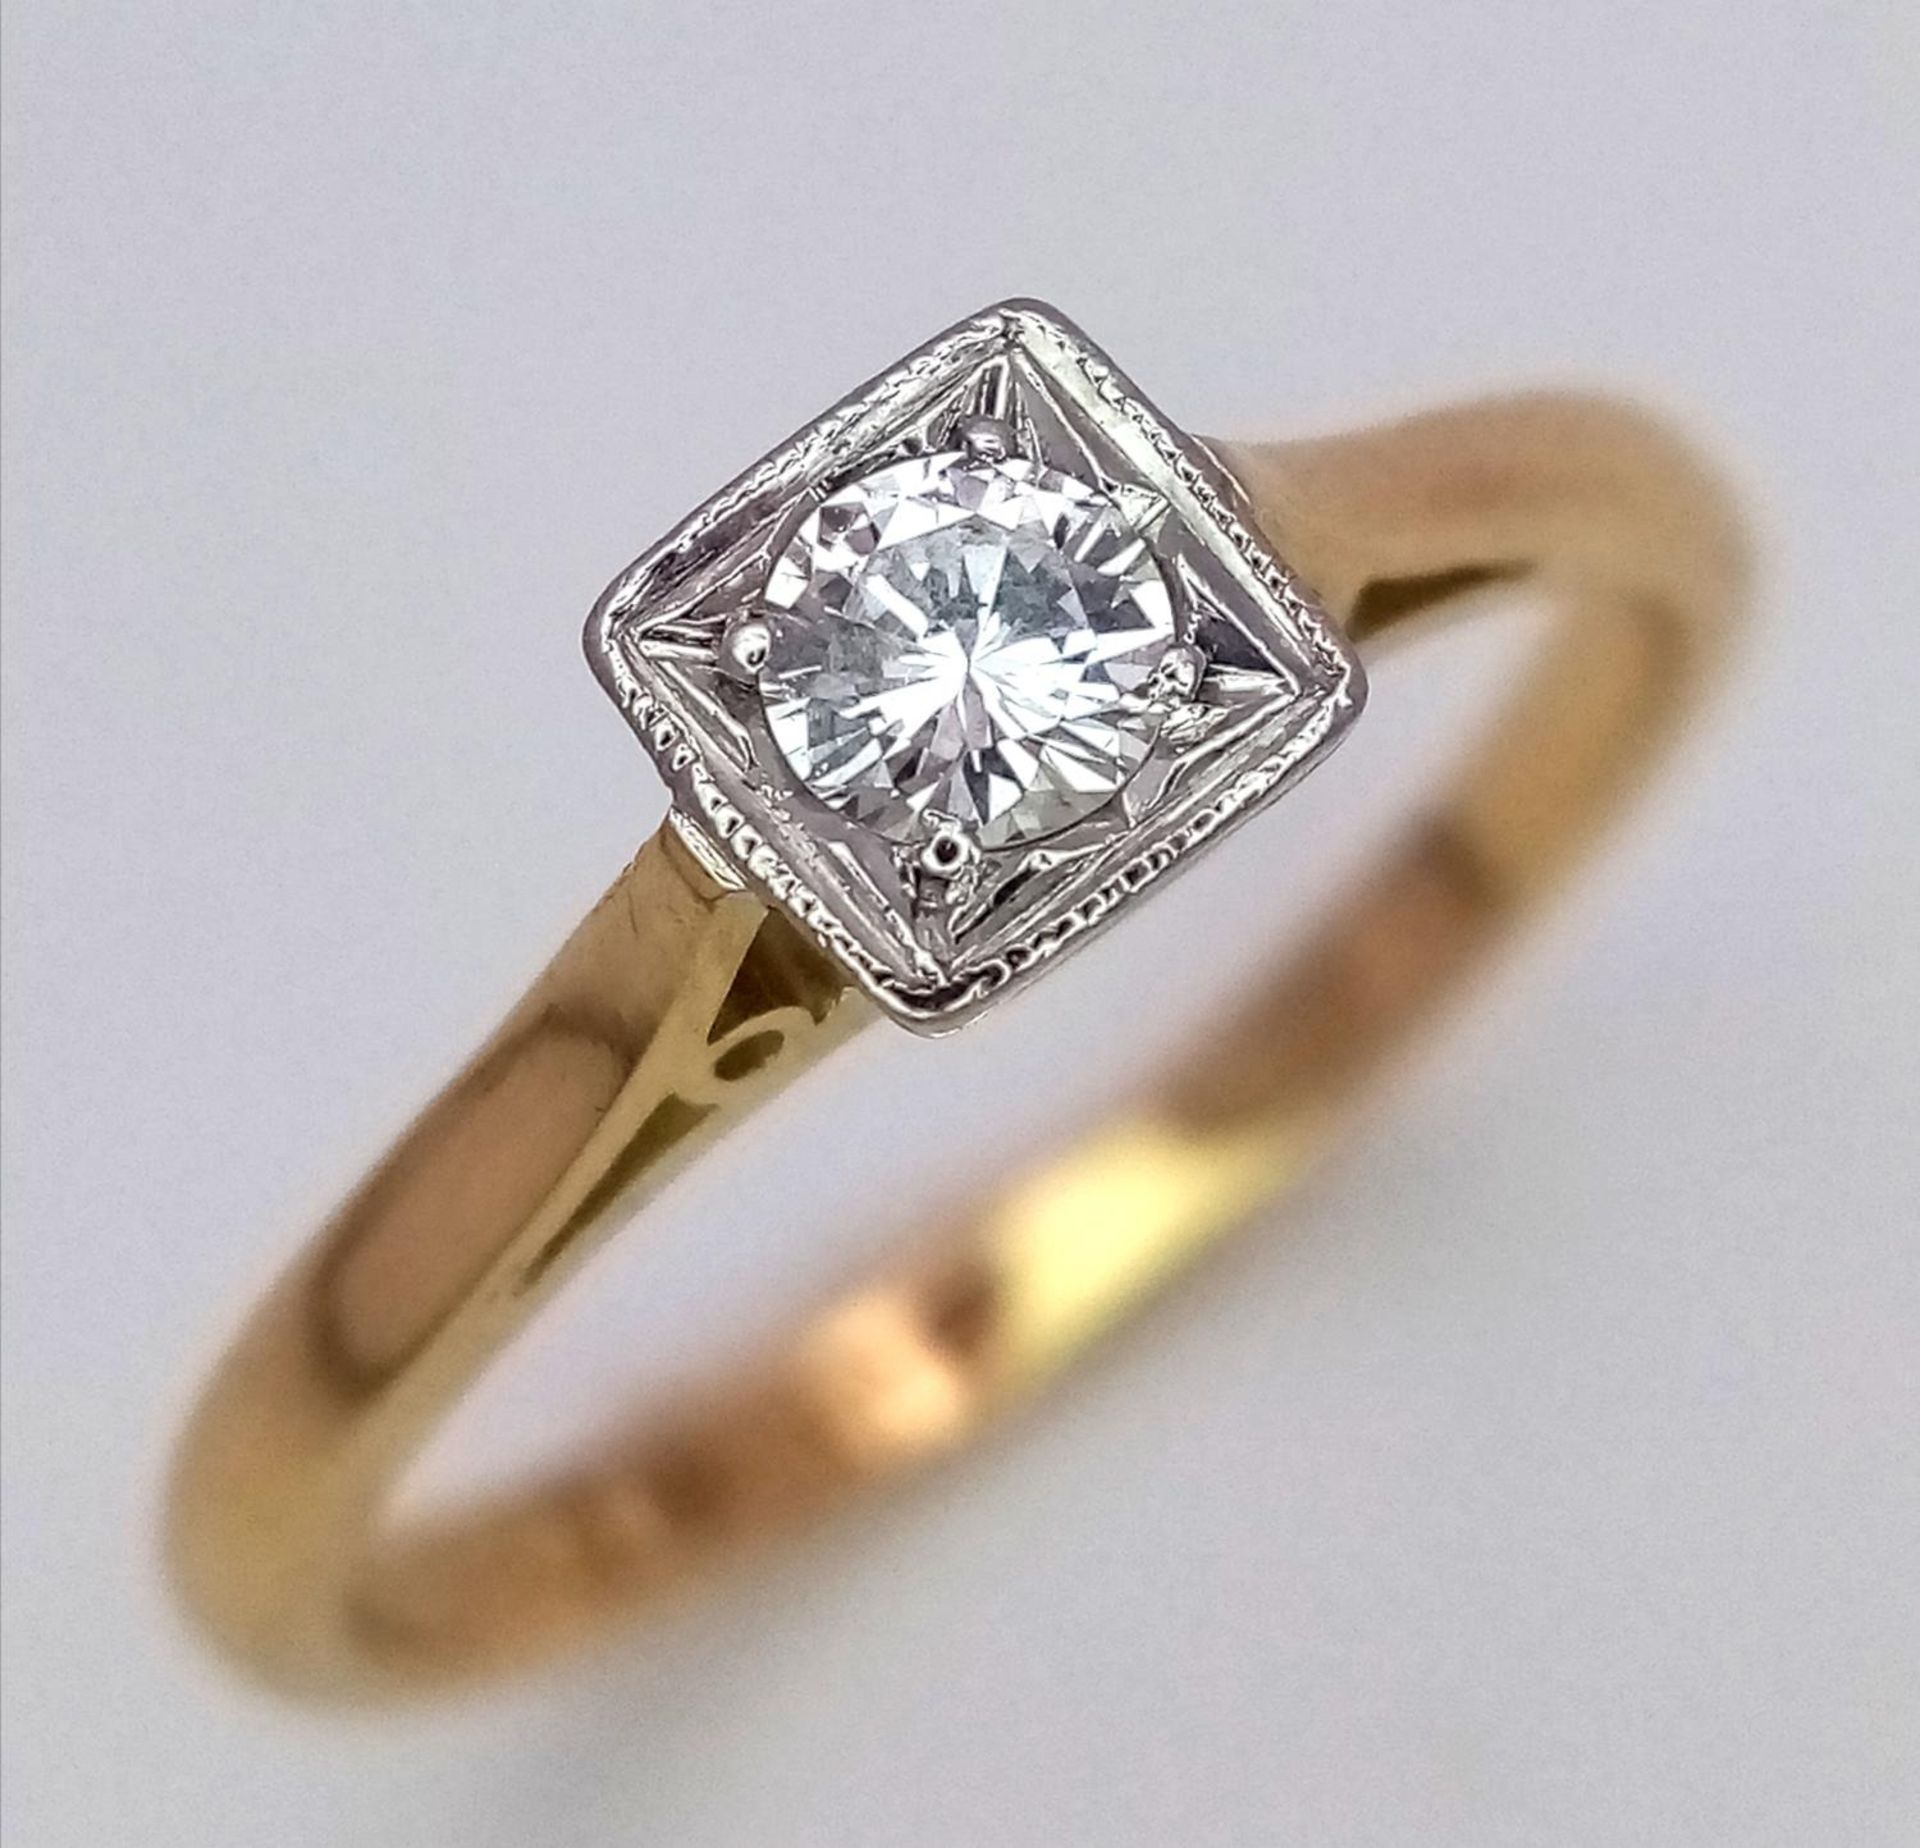 A 18K YELLOW GOLD & PLATINUM DIAMOND SOLITAIRE RING 0.15CT 2.6G SIZE M/N SPAS 9001